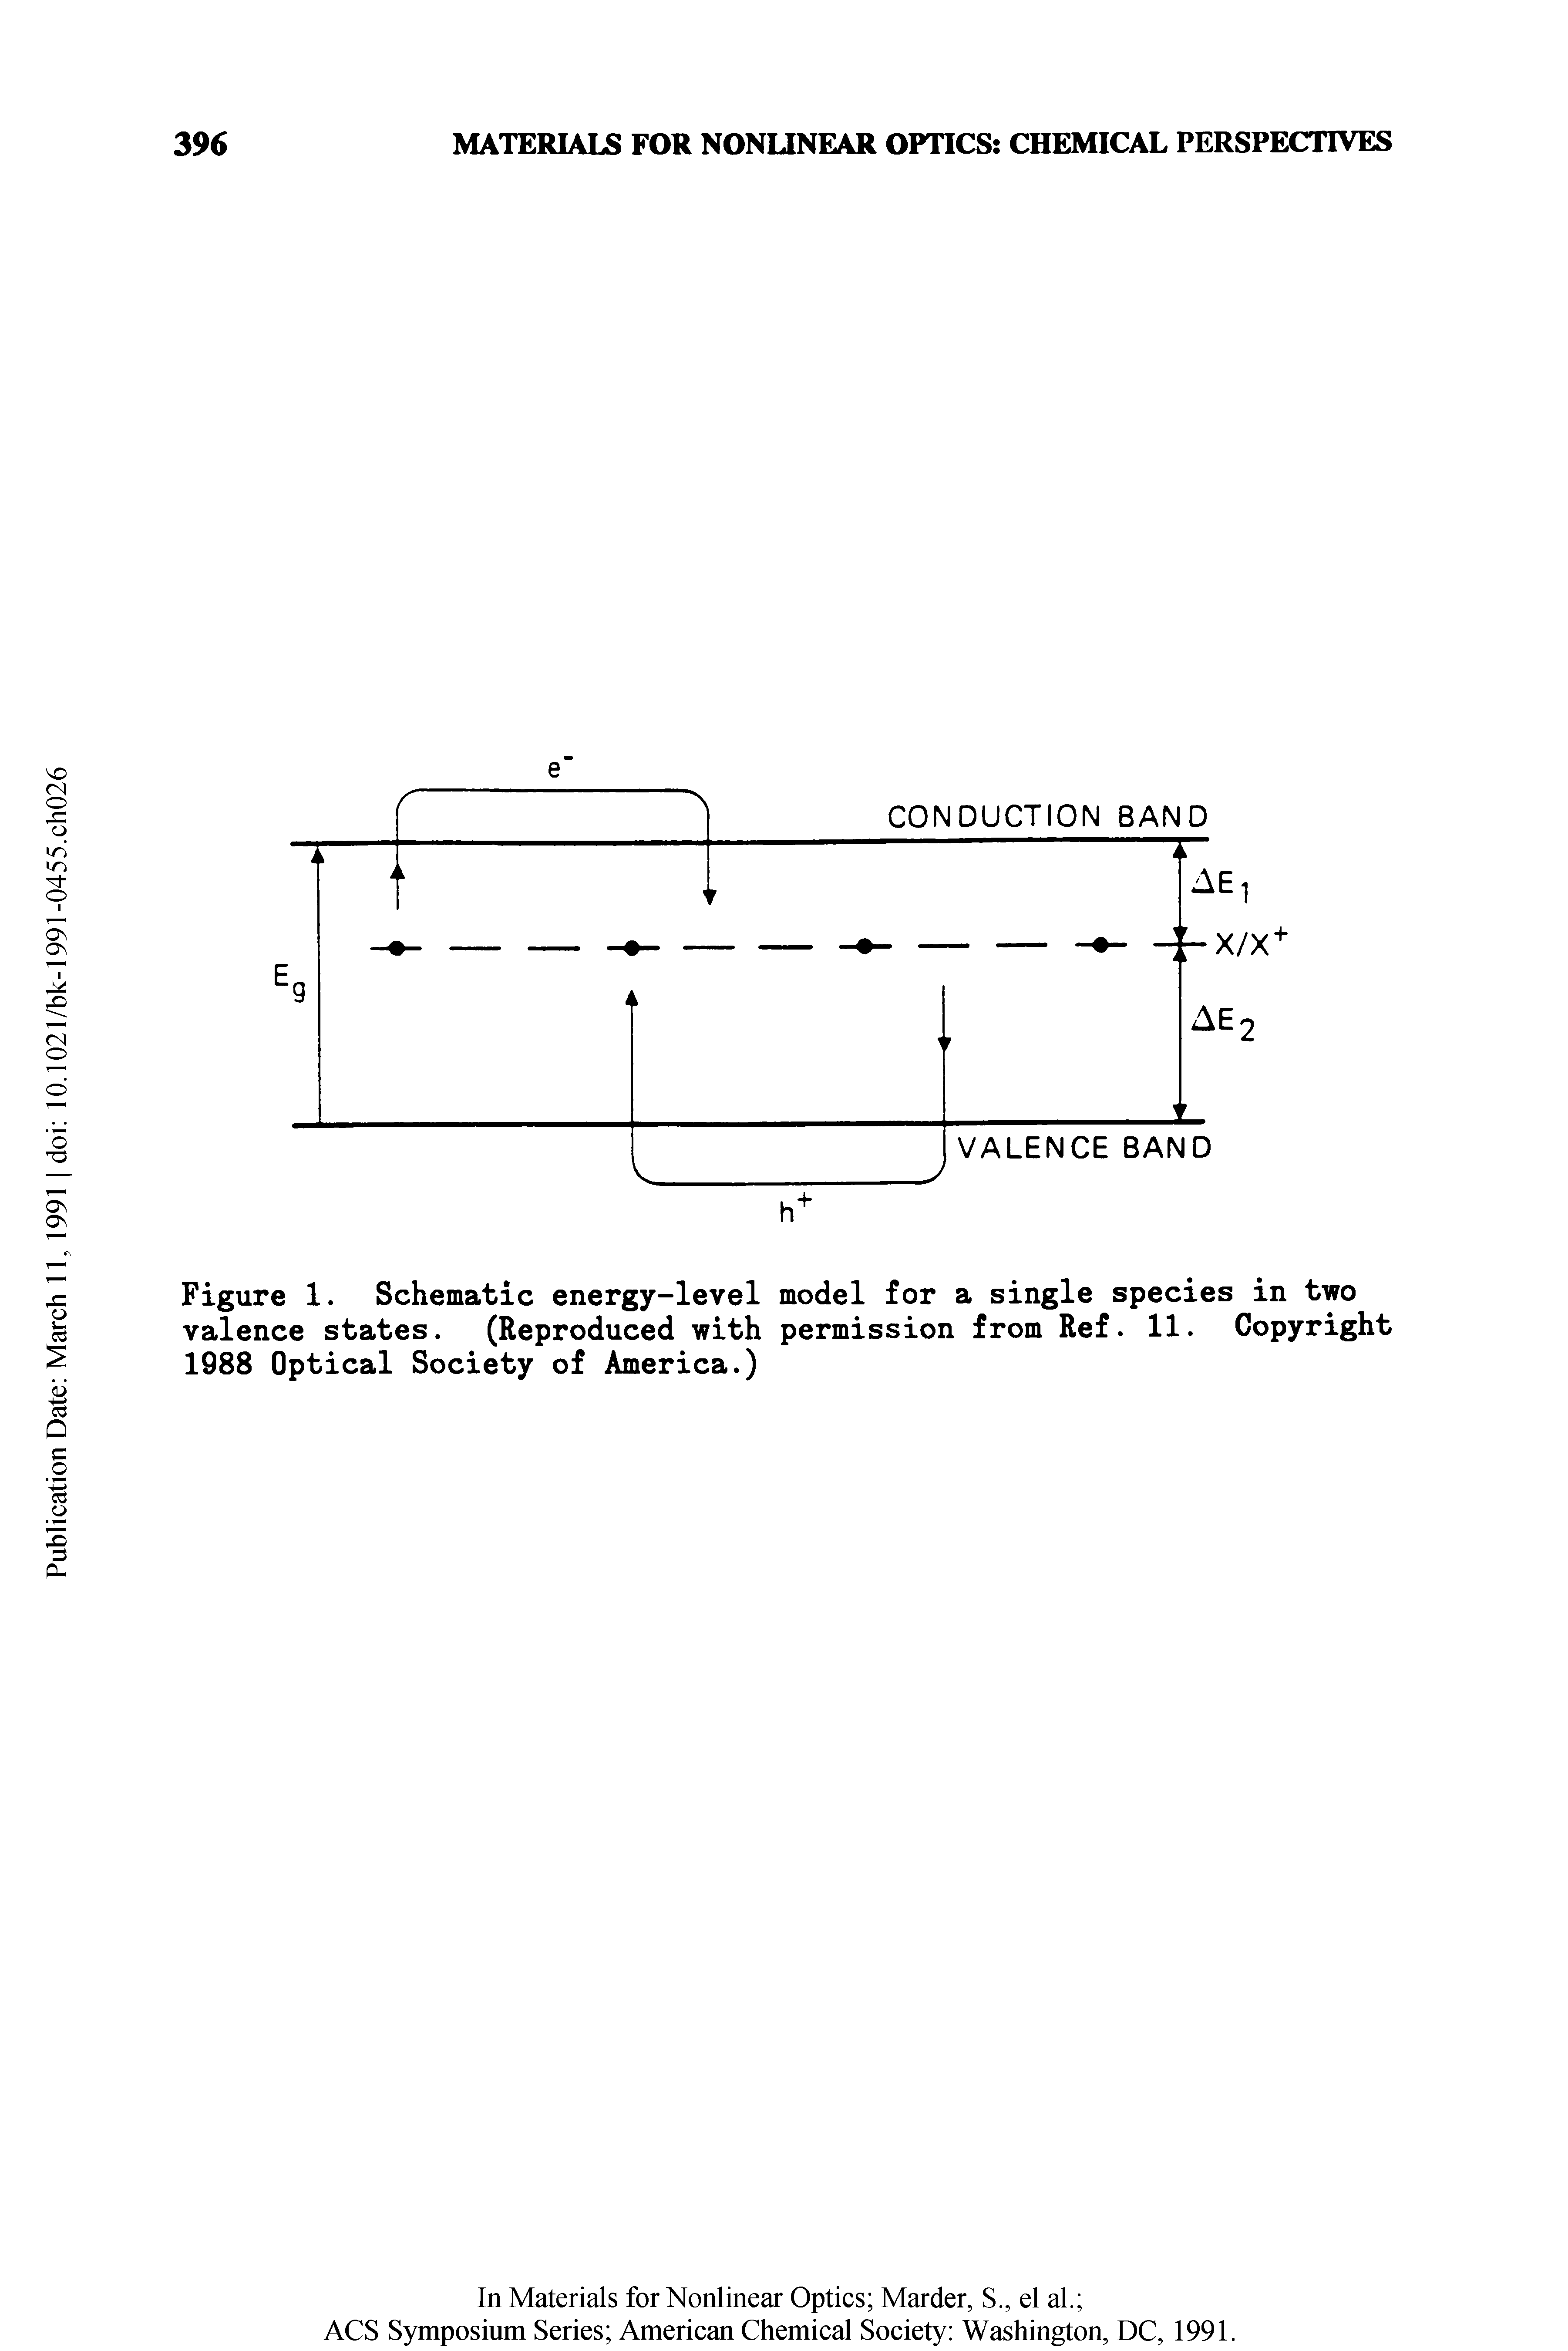 Figure 1. Schematic energy-level model for a single species in two valence states. (Reproduced with permission from Ref. 11. Copyright 1988 Optical Society of America.)...